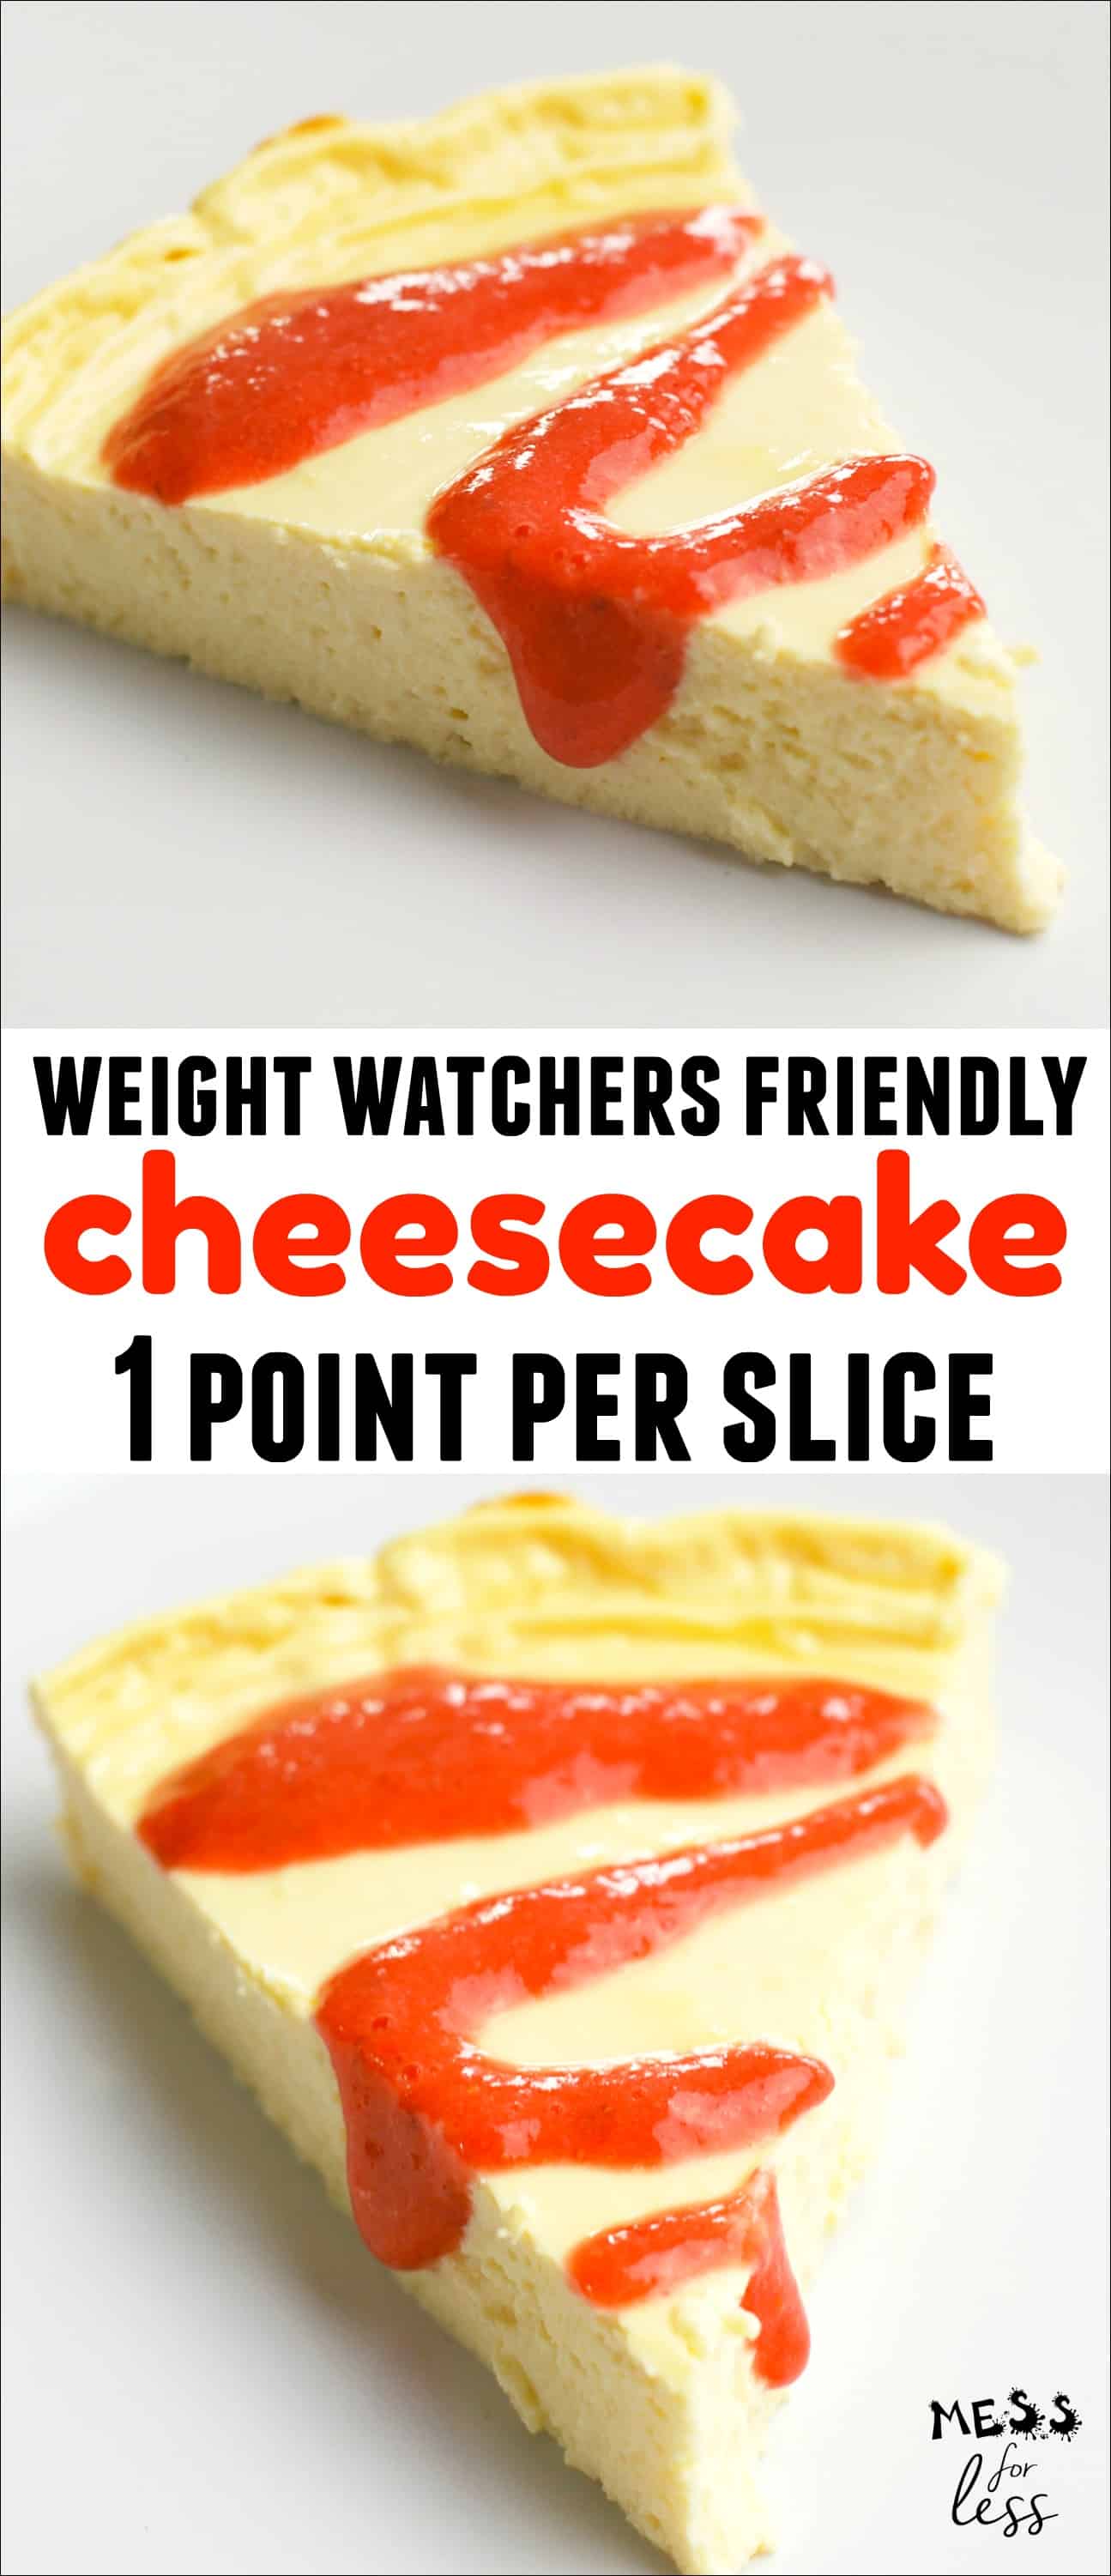 This One Point Cheesecake is delicious and creamy and just one point per slice. Only 4 points for the entire cake on the Weight Watchers Freestyle plan. #weightwatchers #freestyle #onepointcheesecake